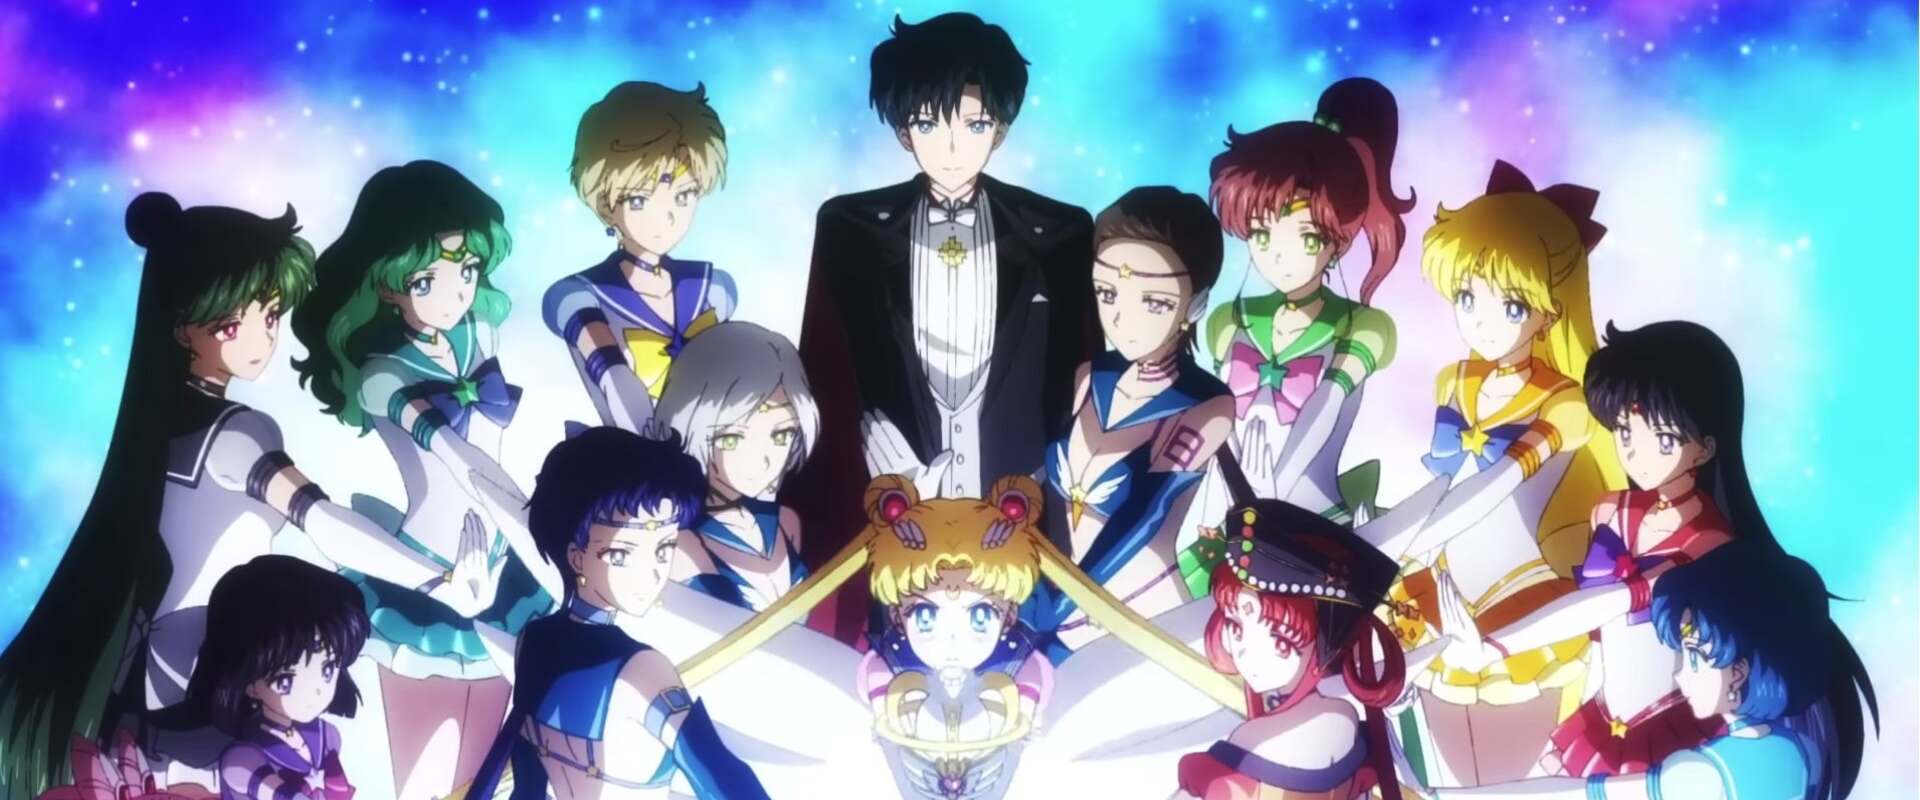 Pretty Guardian Sailor Moon Cosmos The Movie Part 1 background 2